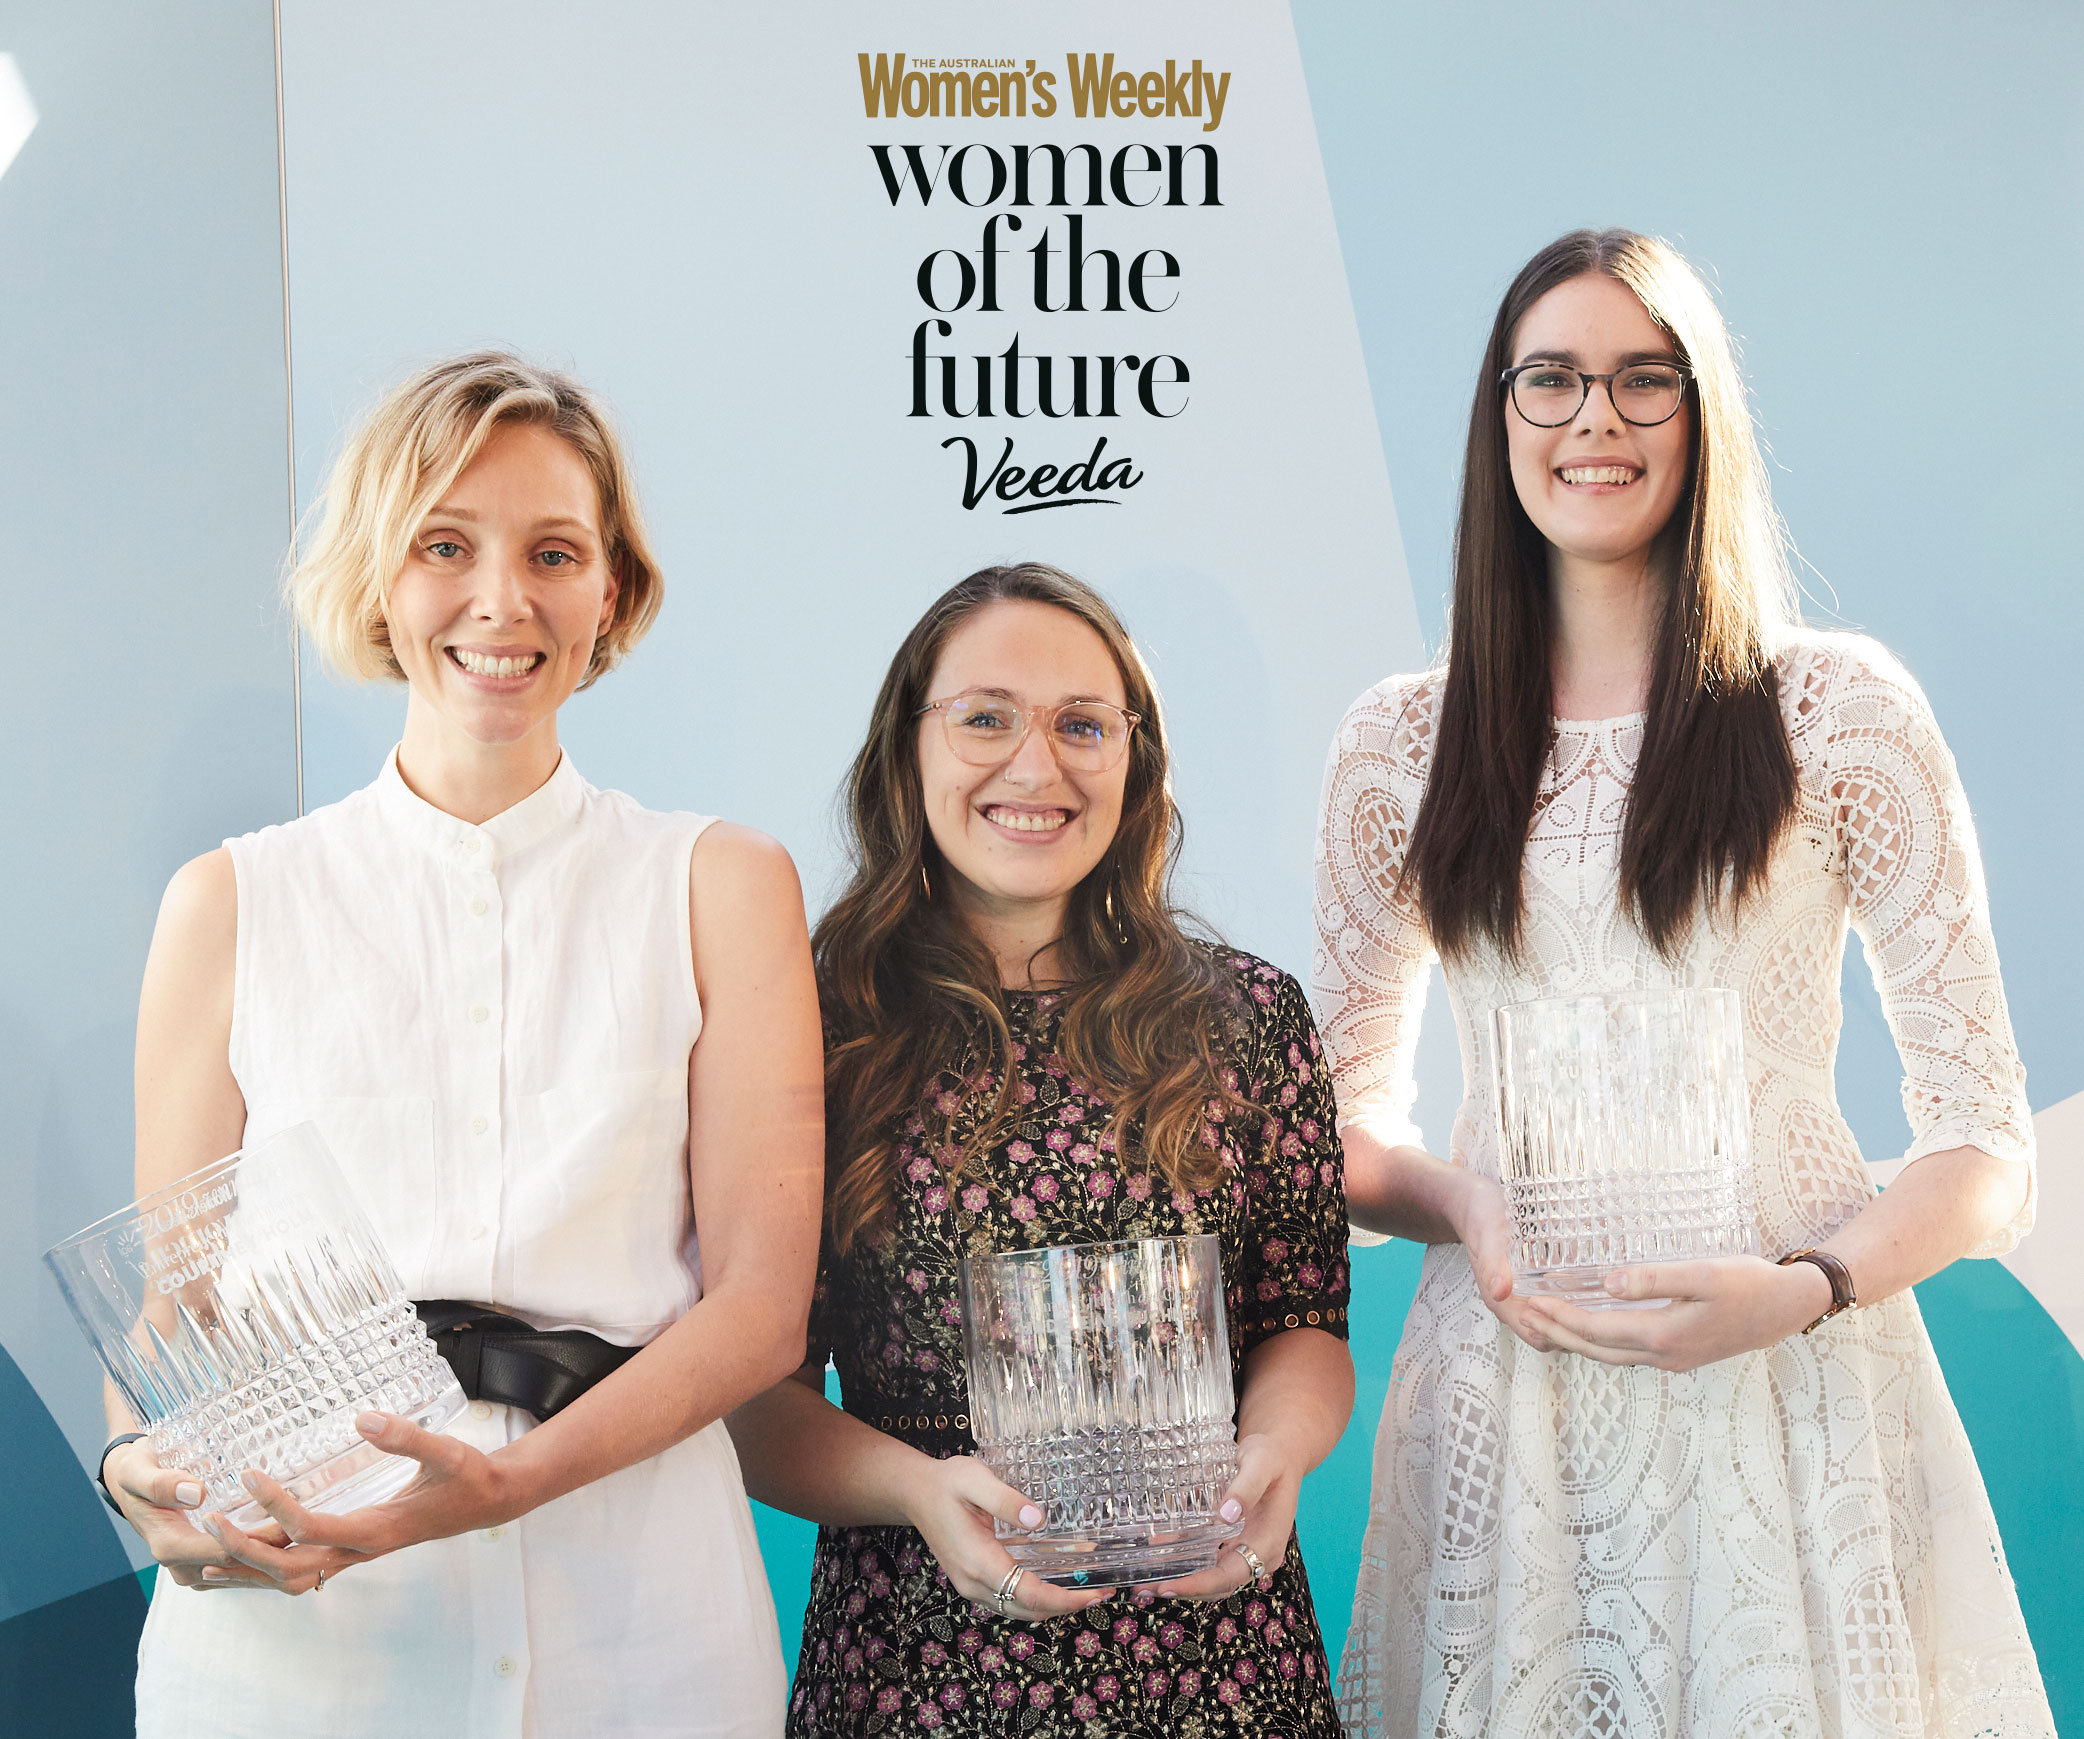 Women of the Future: The Weekly catches up with some of the most extraordinary award winners